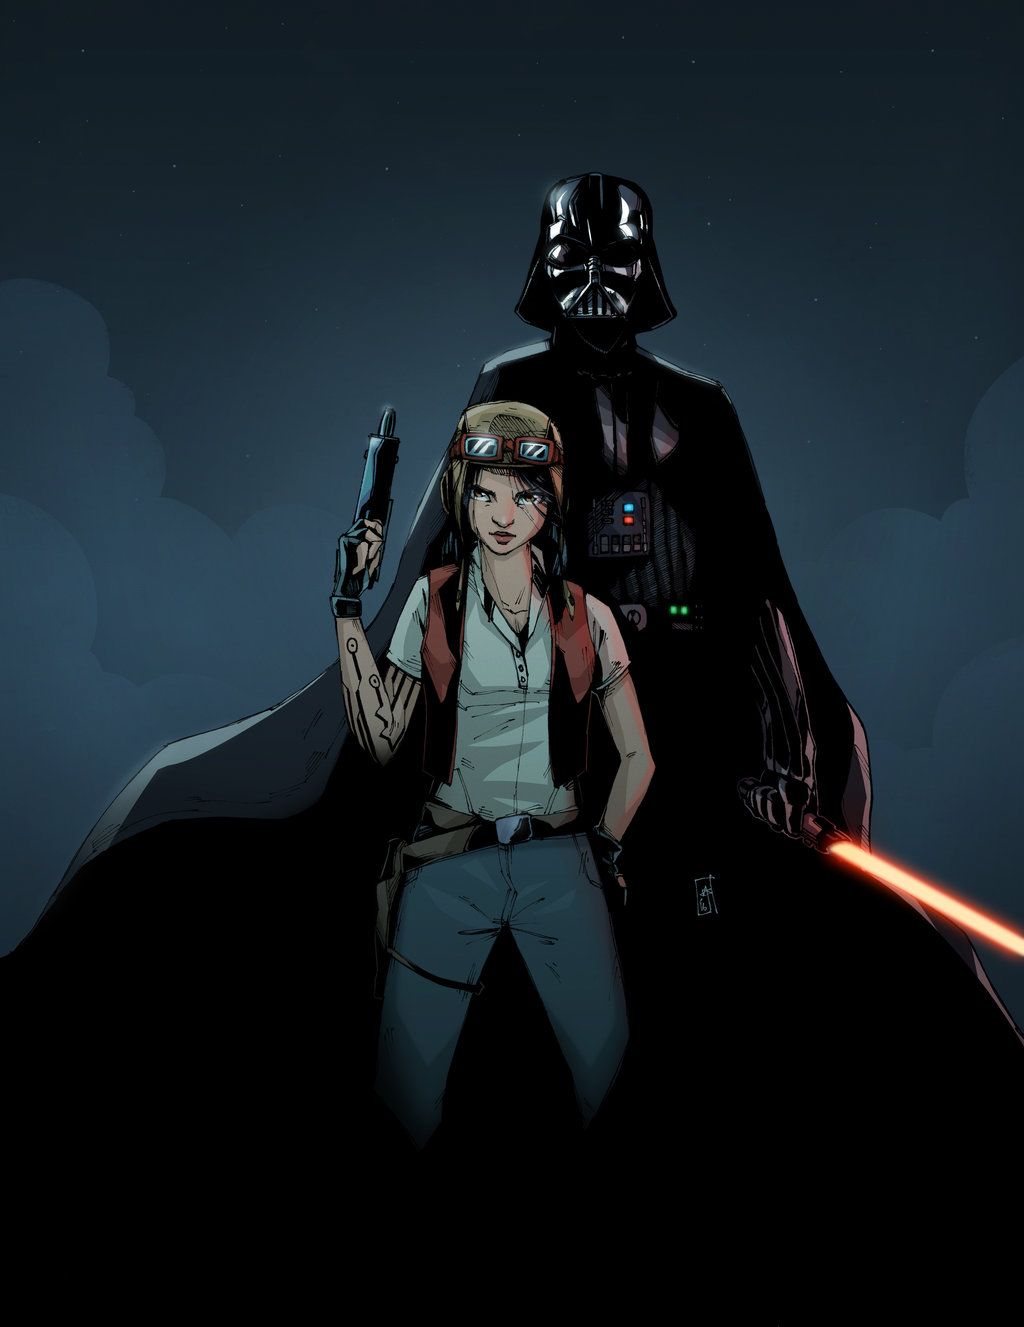 Star Wars - Darth Vader and Doctor Aphra Fan Art by Mono-Owl